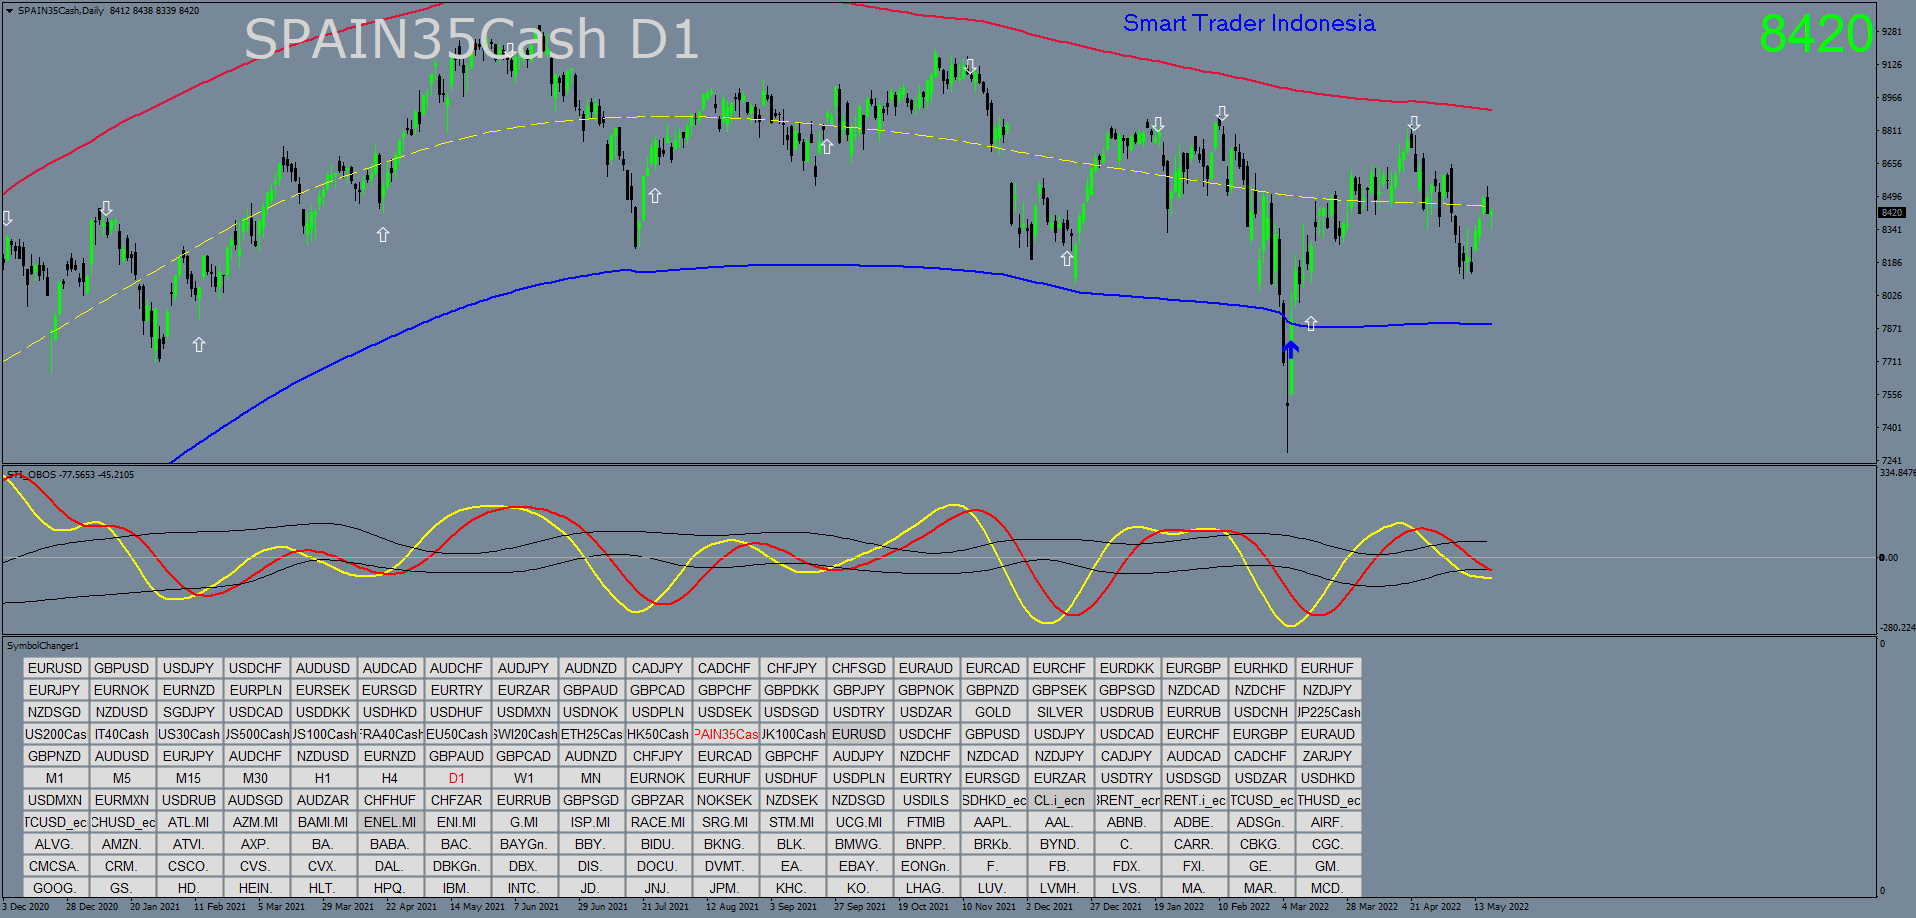 spain35cash-d1-trading-point-of (8).png